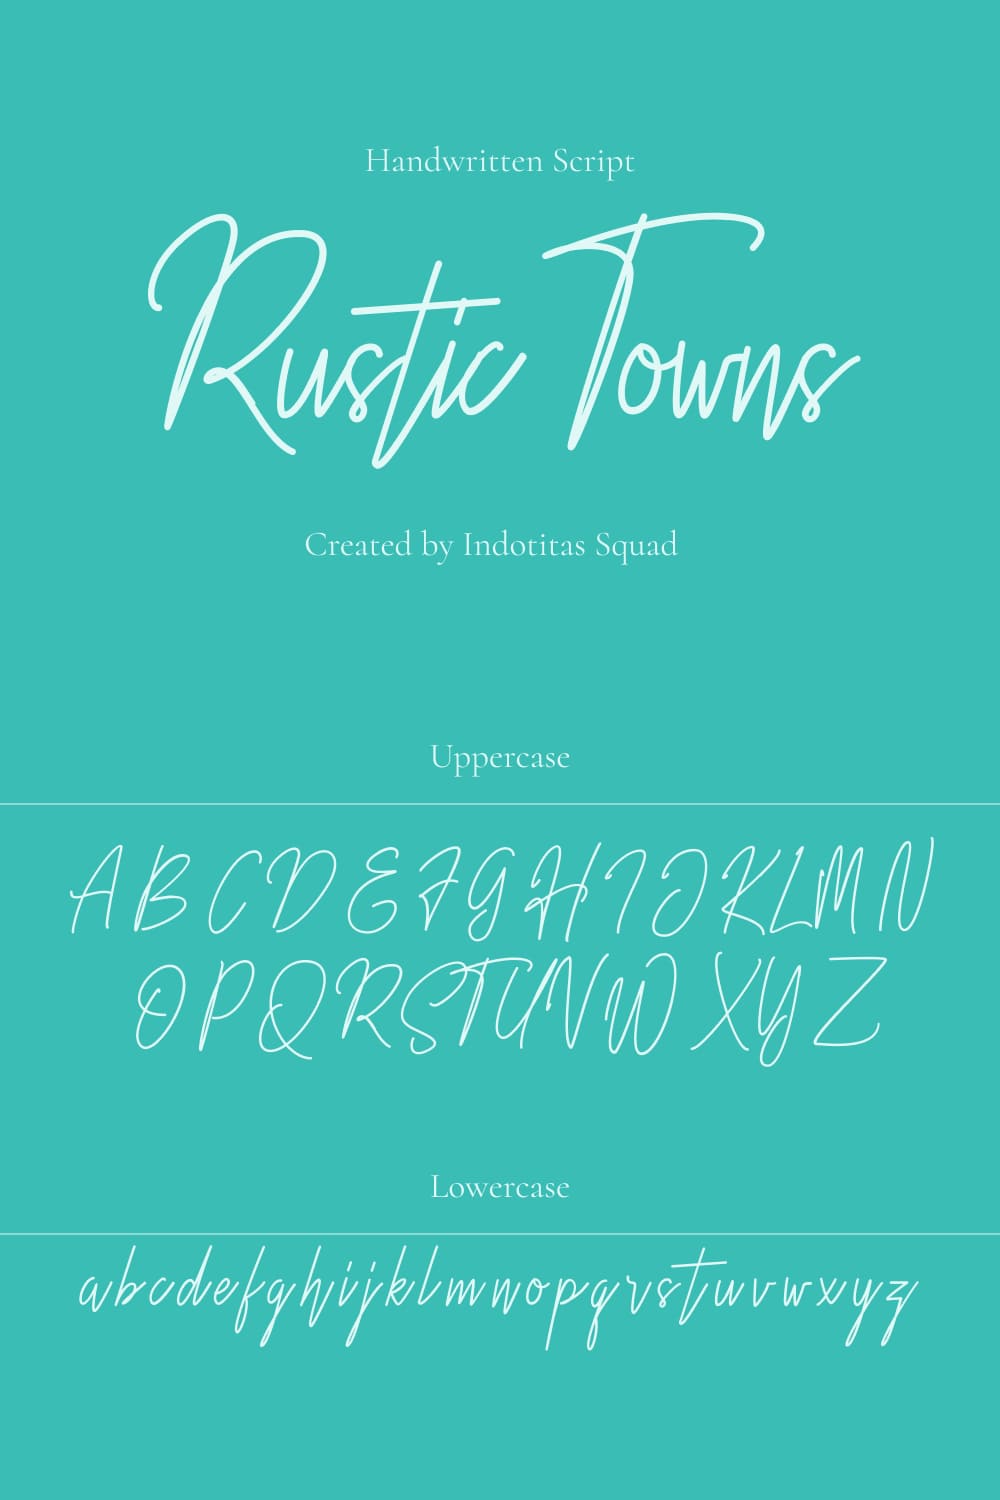 Using the Rustic Towns font on a green background.